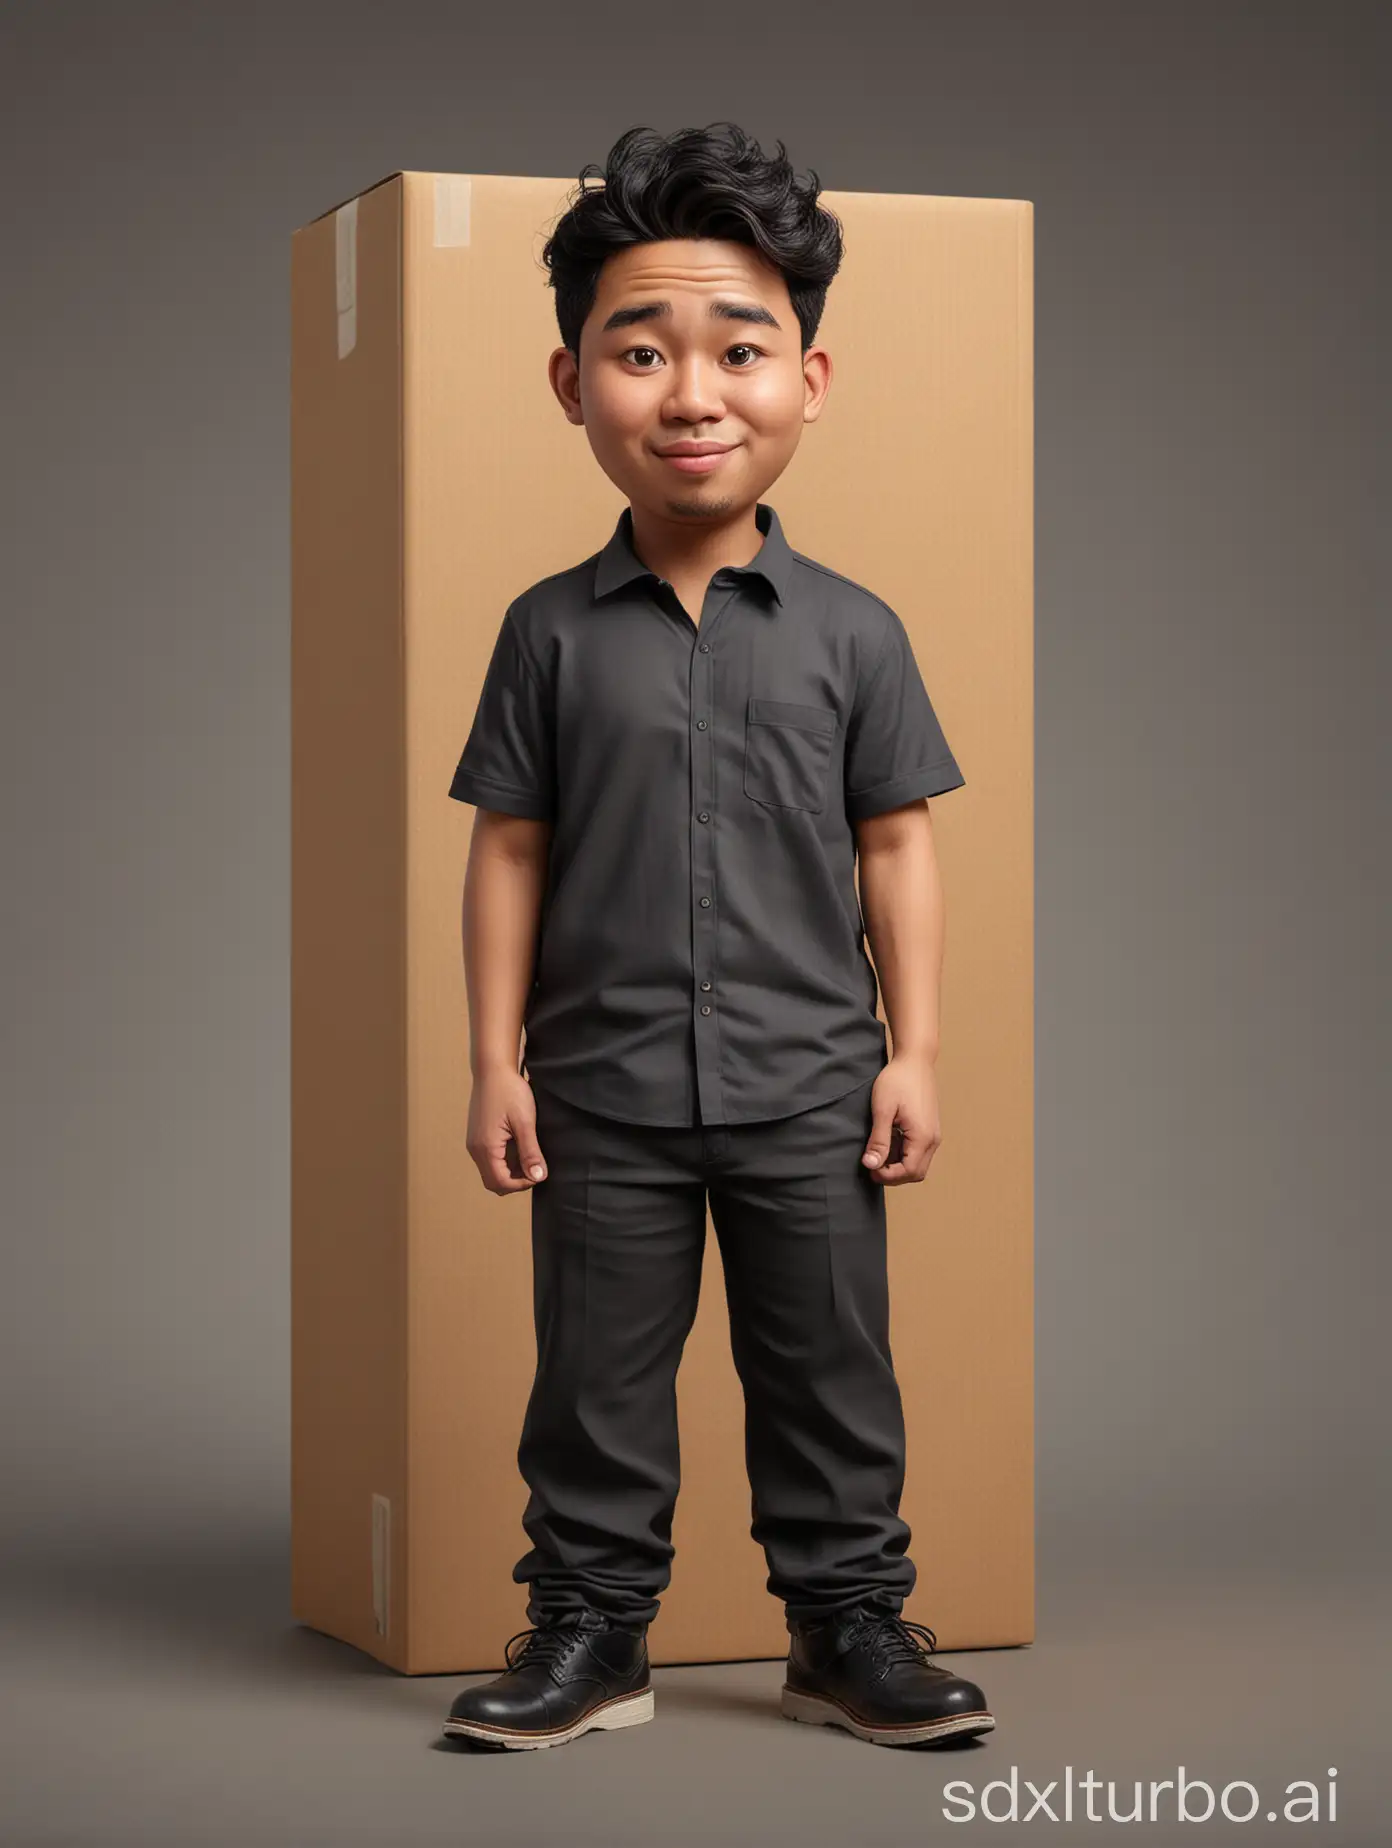 4d caricature of 26 year old Indonesian man, round face, chubby, short wavy hair, wearing a shirt and black trousers. Wear black shoes. with brown box packaging. big head, realistic